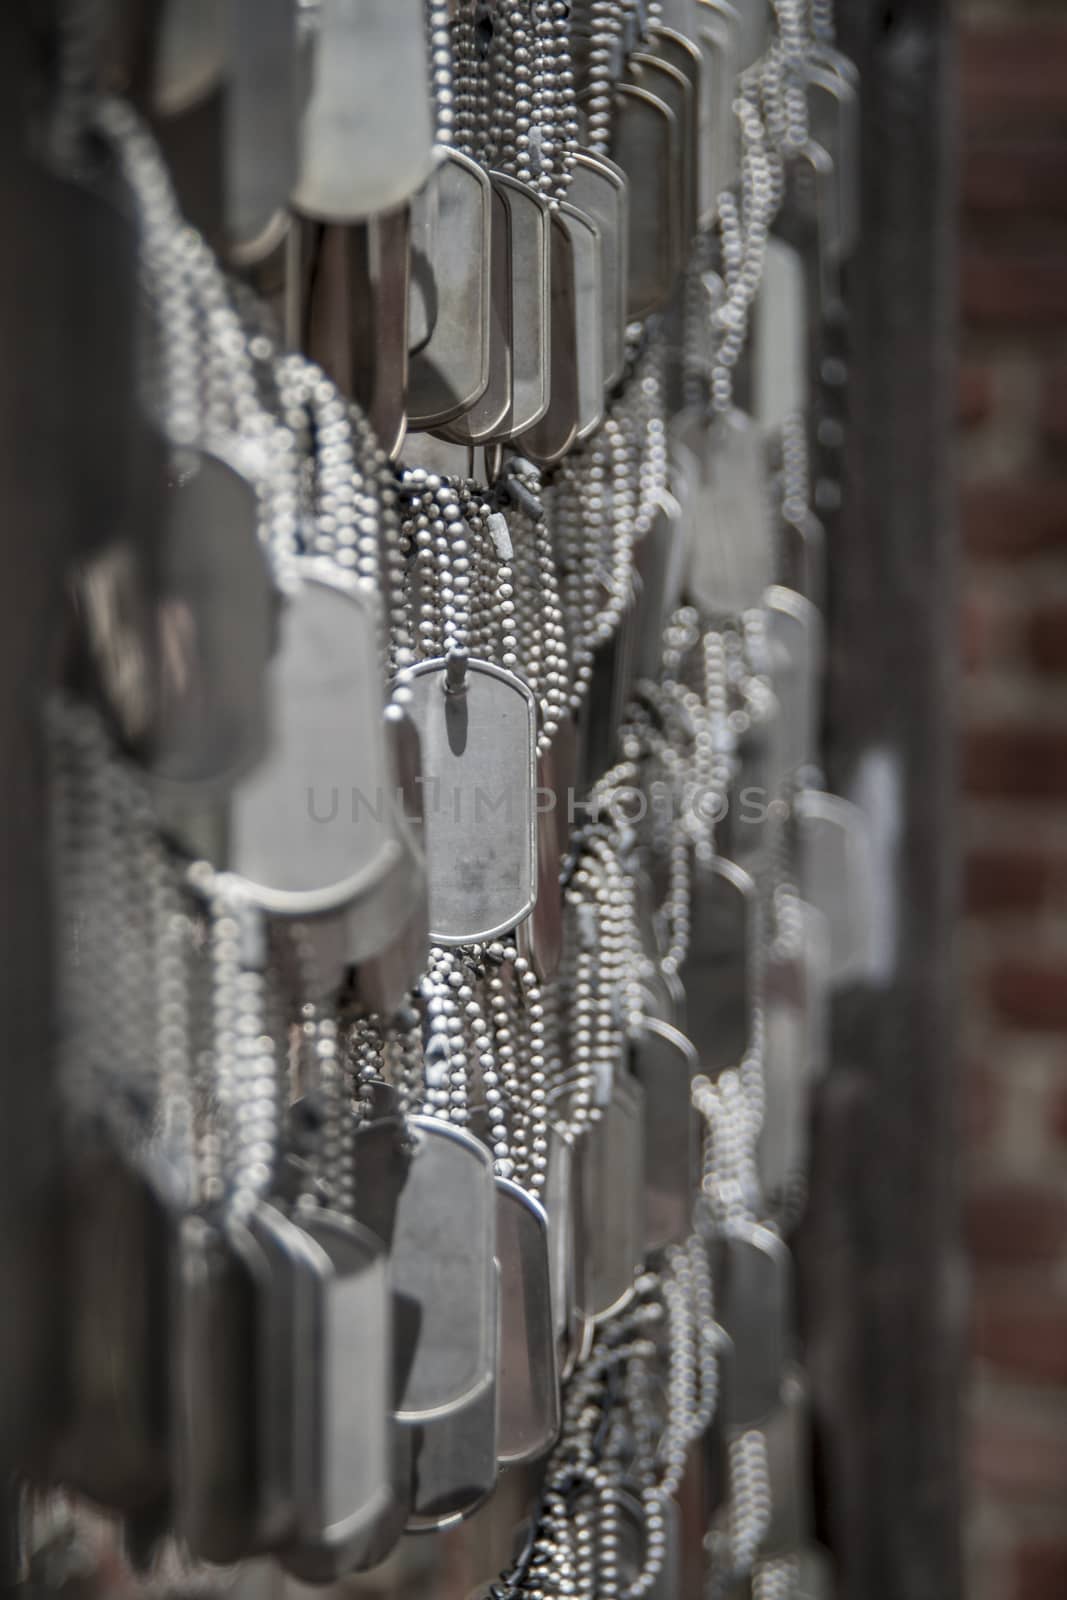 Symbolically blank soldier dog tags at a memorial